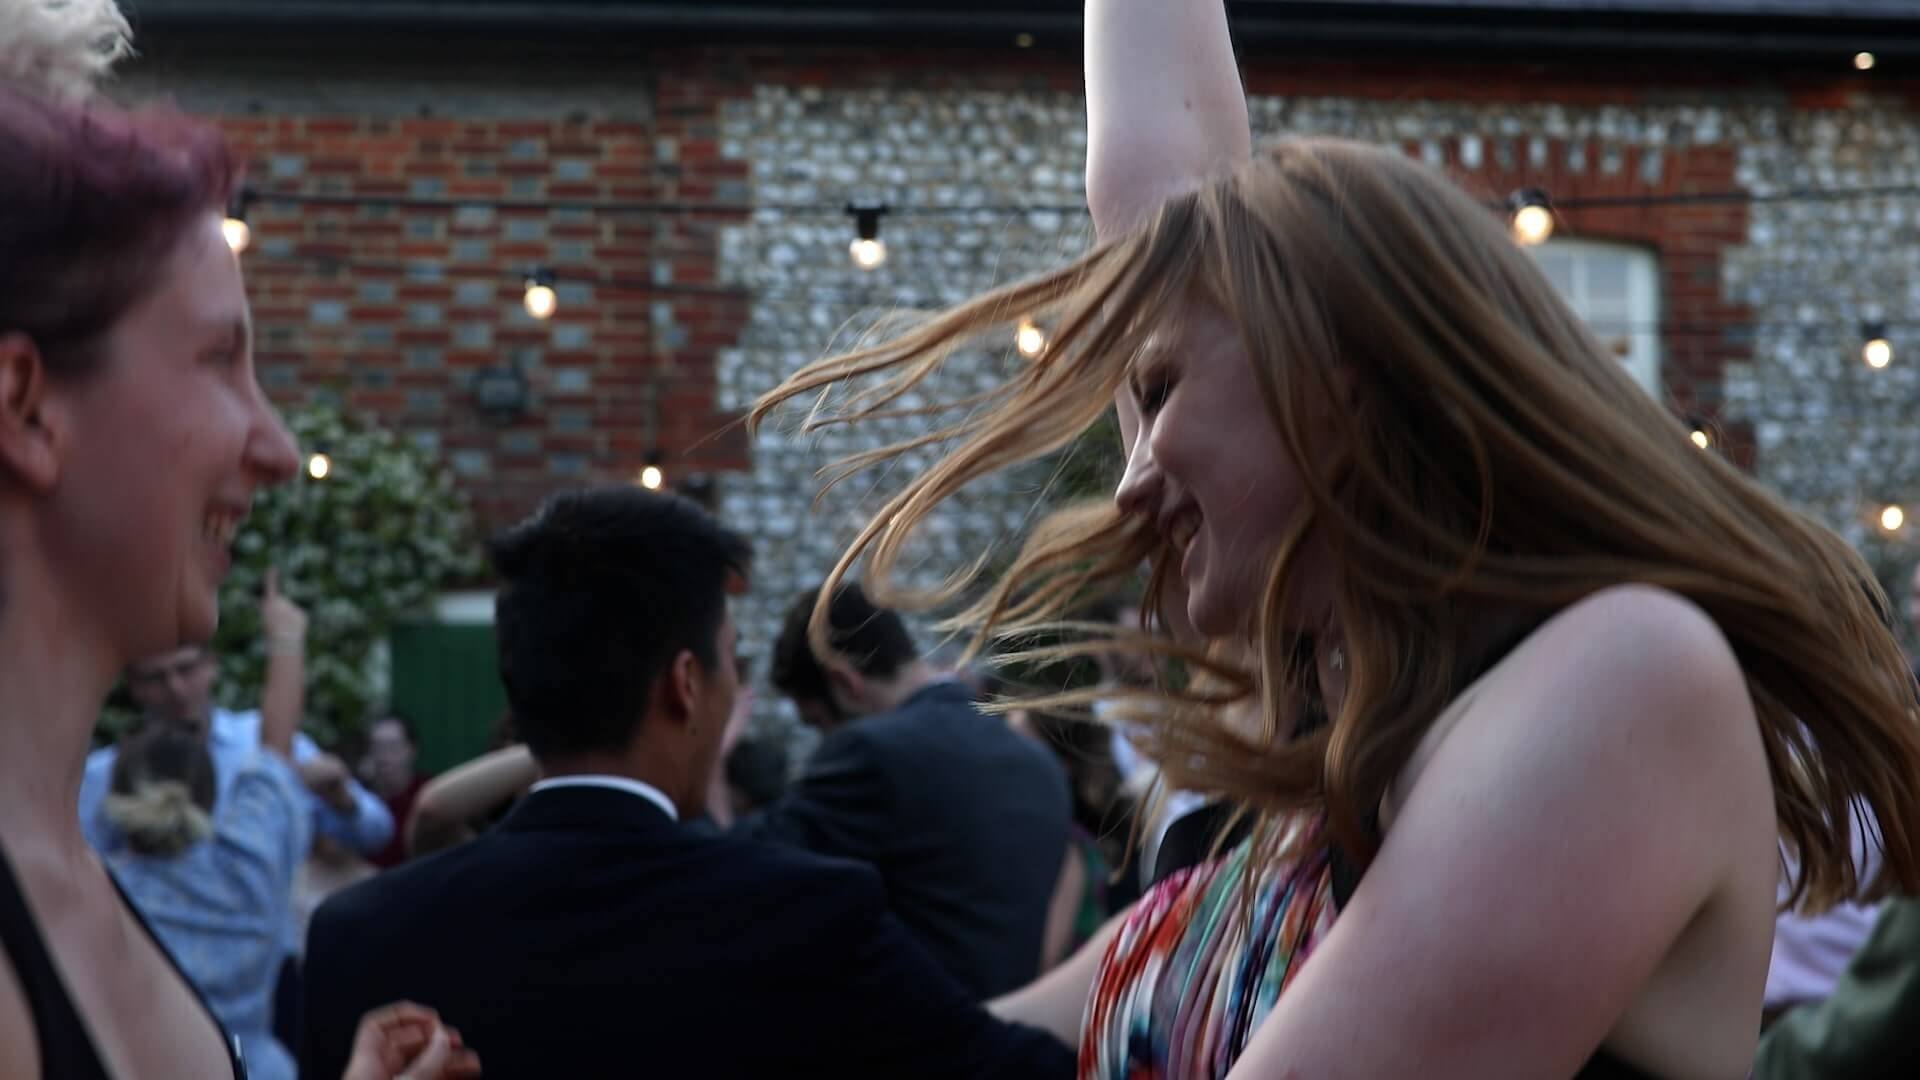 Redhead woman enjoys dancing at the wedding party with her arm up in the air